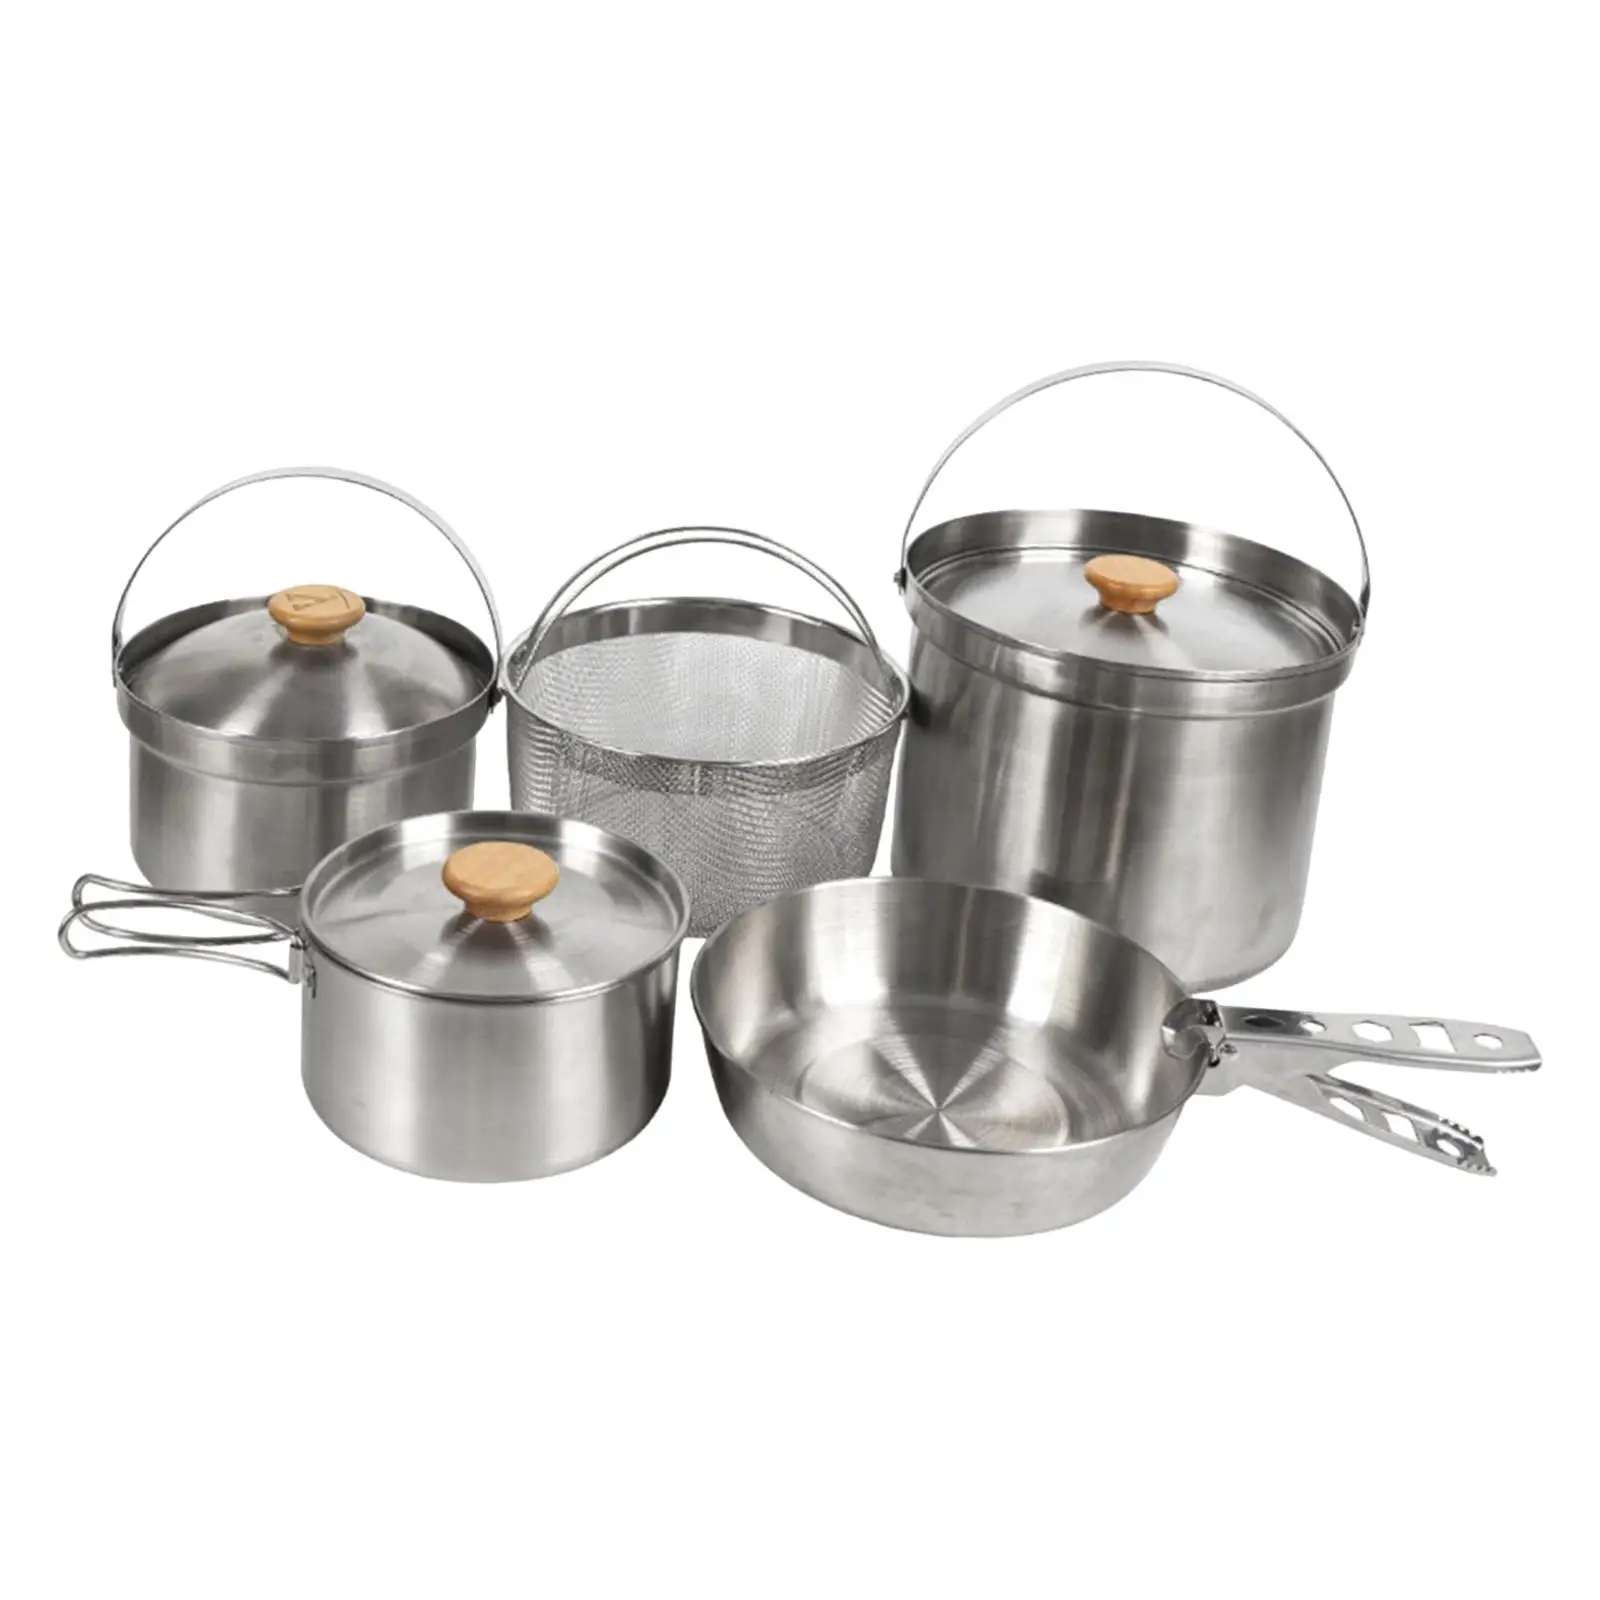 5 Pieces Stainless Steel Cooking Pot Camping Pan Lightweight Household Cookware for BBQ